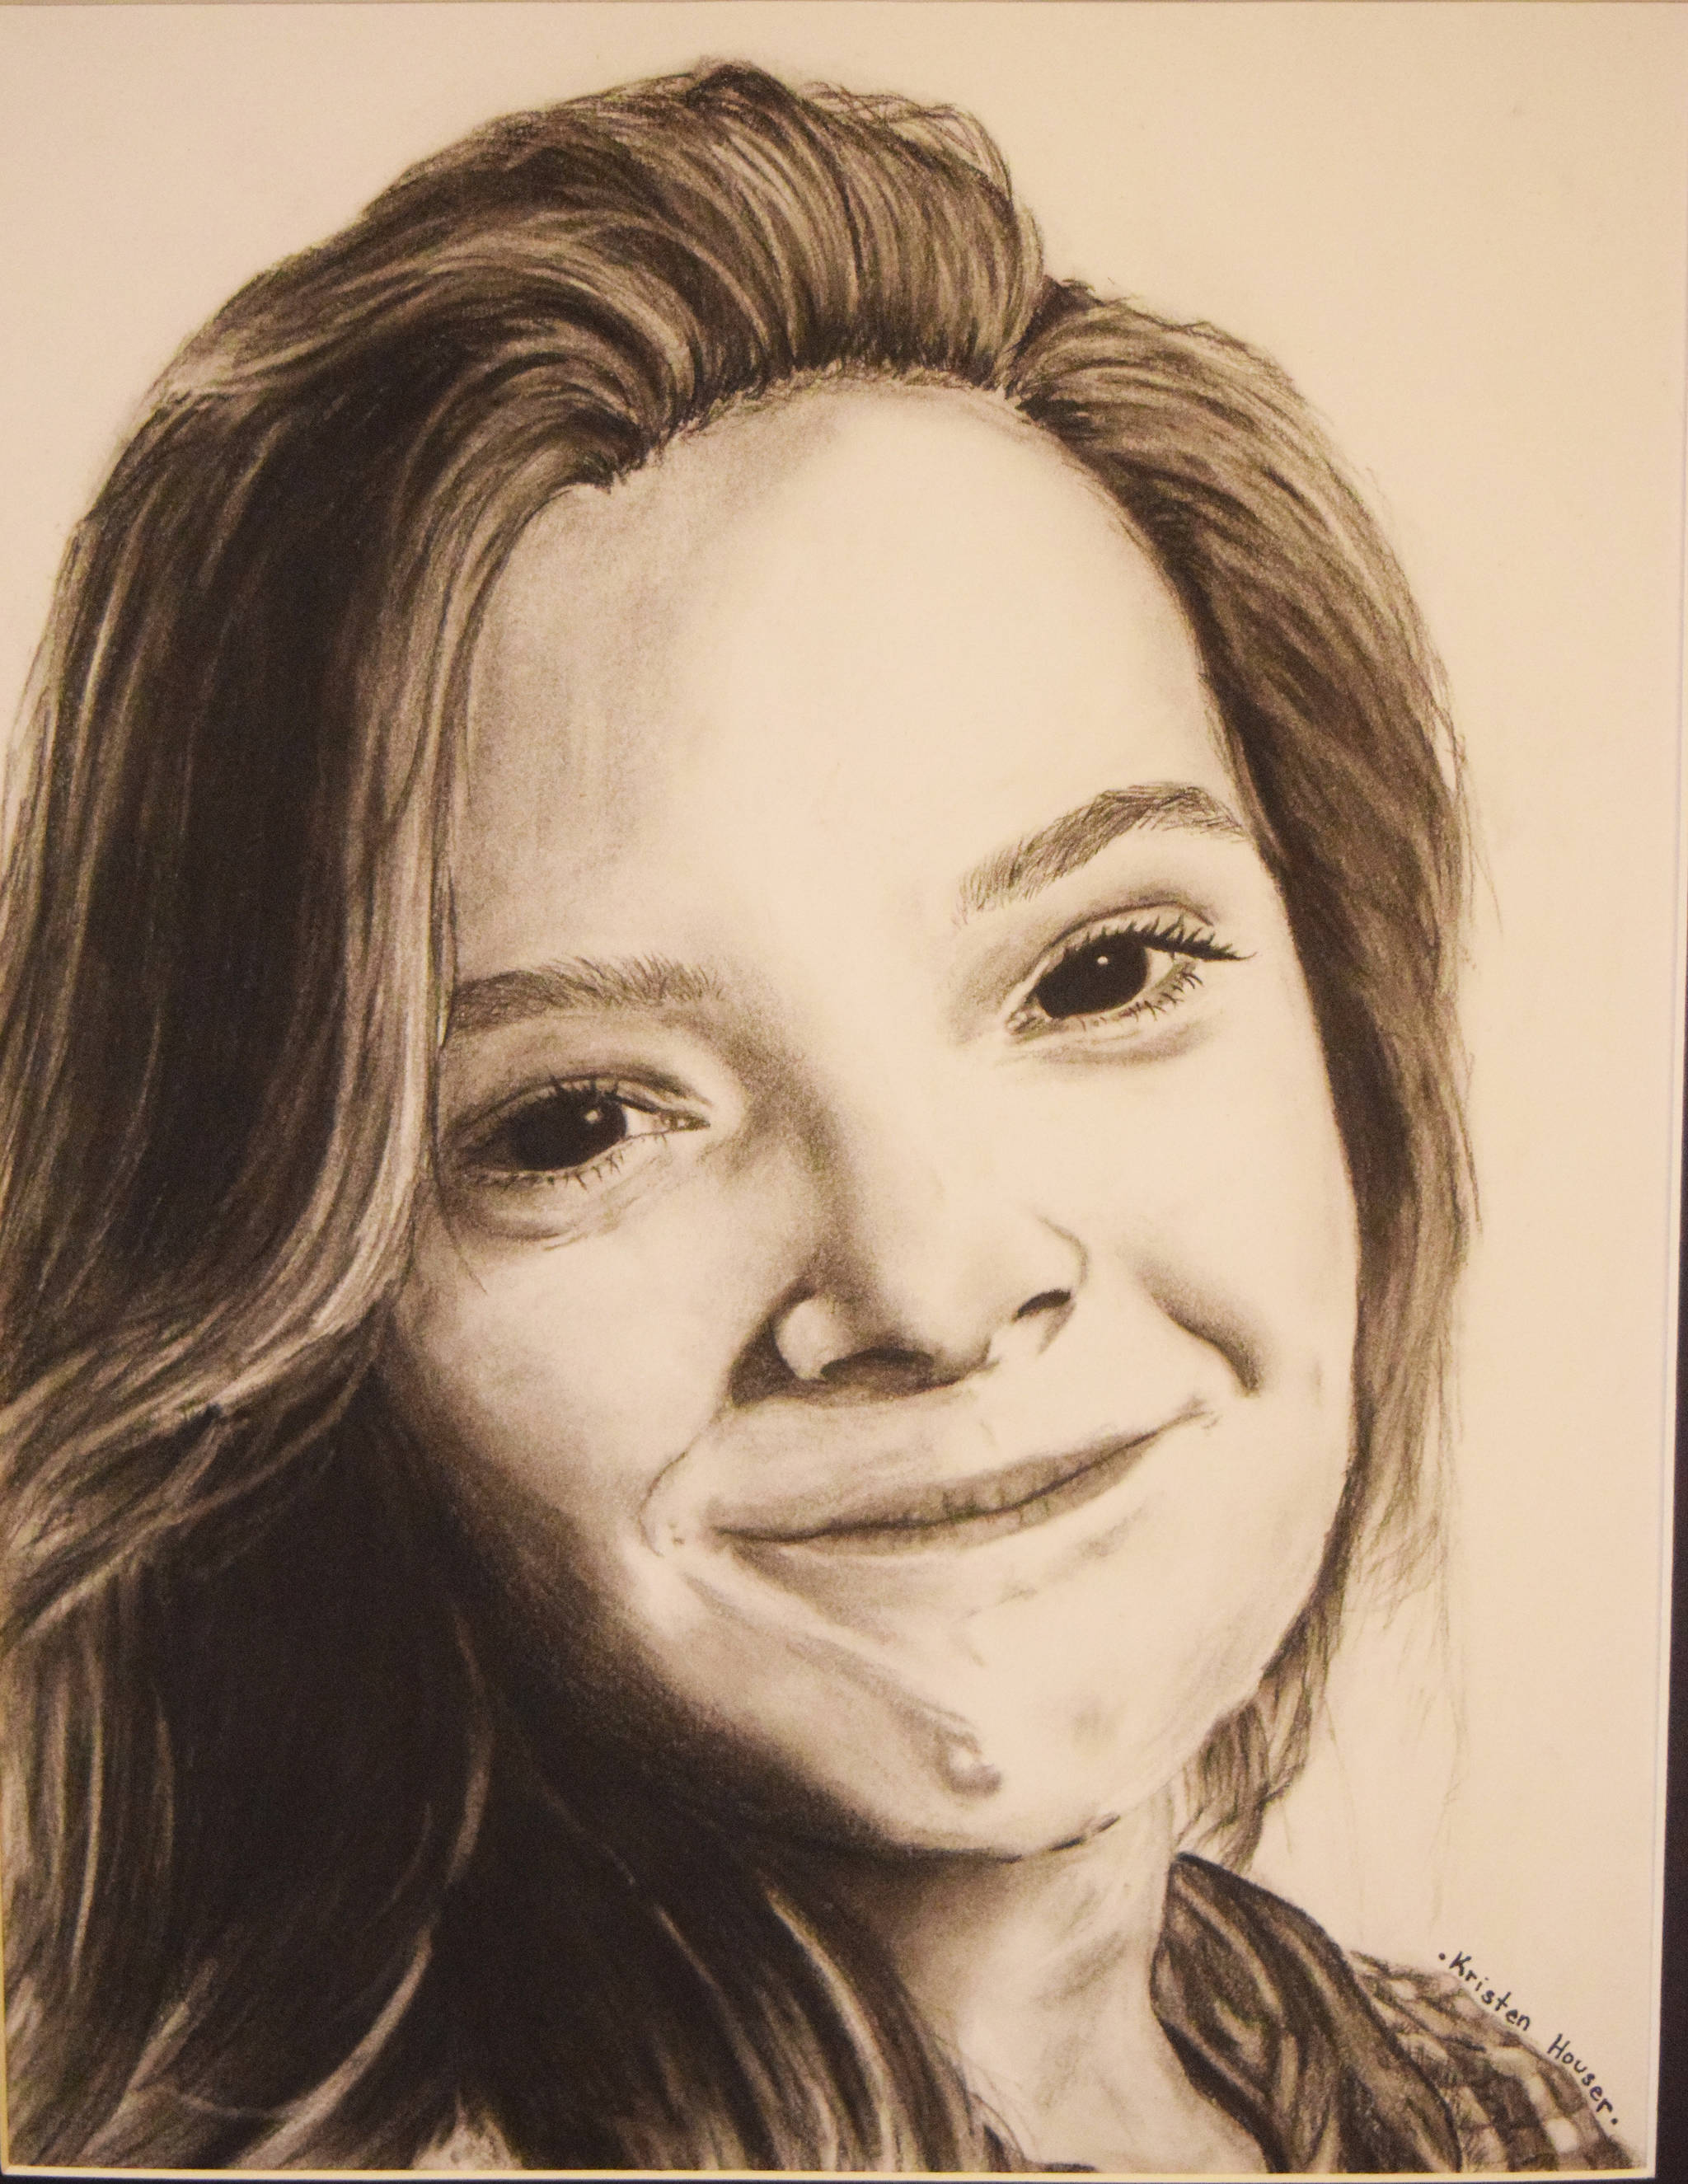 A self-portrait drawing by Skyview Middle School eighth grader Kristin Houser hangs in the gallery at the Kenai Fine Arts Center during Thursday’s opening reception of the 30th anniversary Visual Feast art show. (Photo by Joey Klecka/Peninsula Clarion)